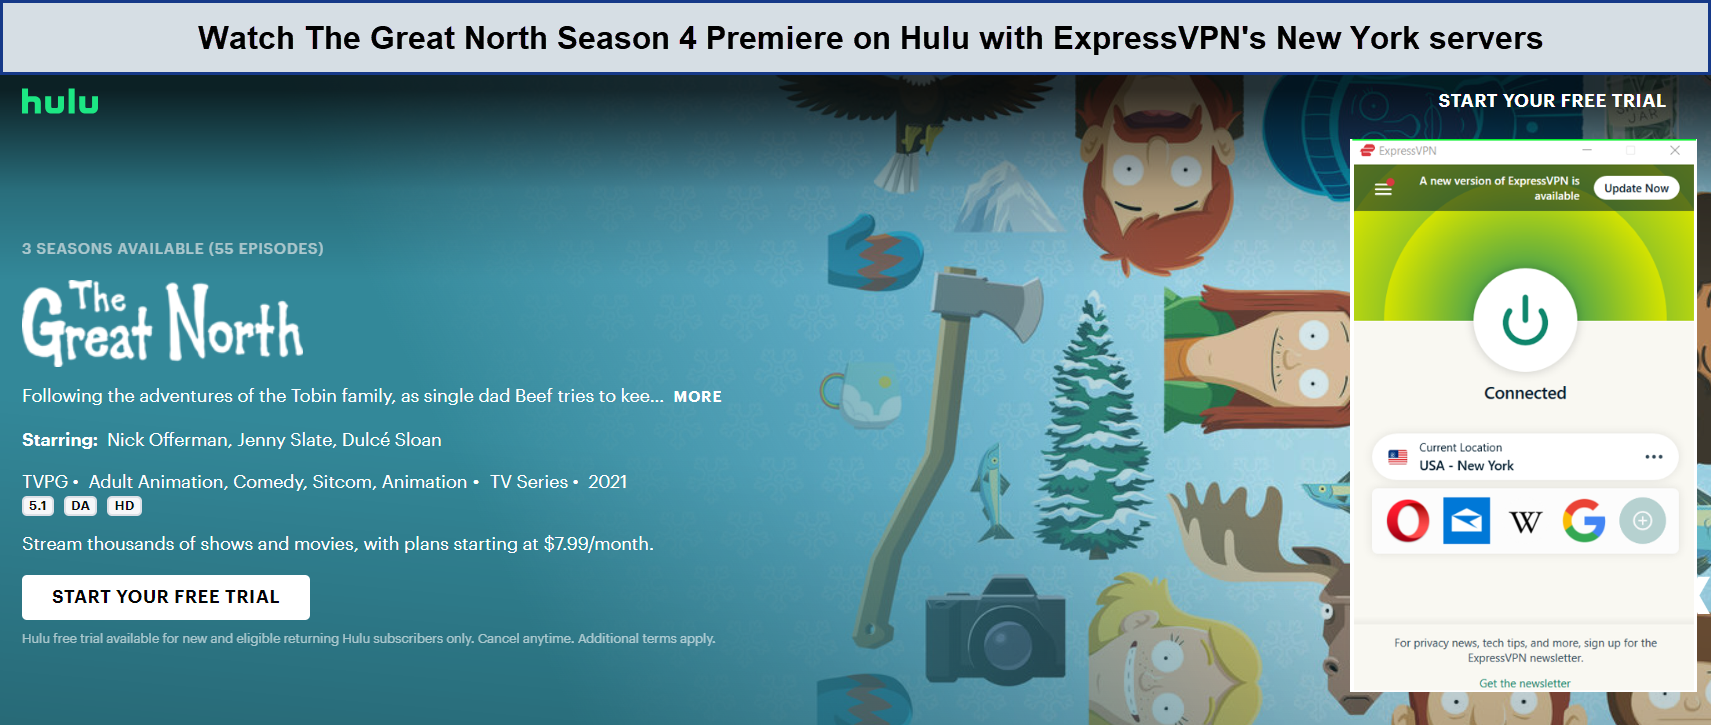 Watch-The-Great-North-Season-4-on-Hulu-with-ExpressVPN-in-Singapore